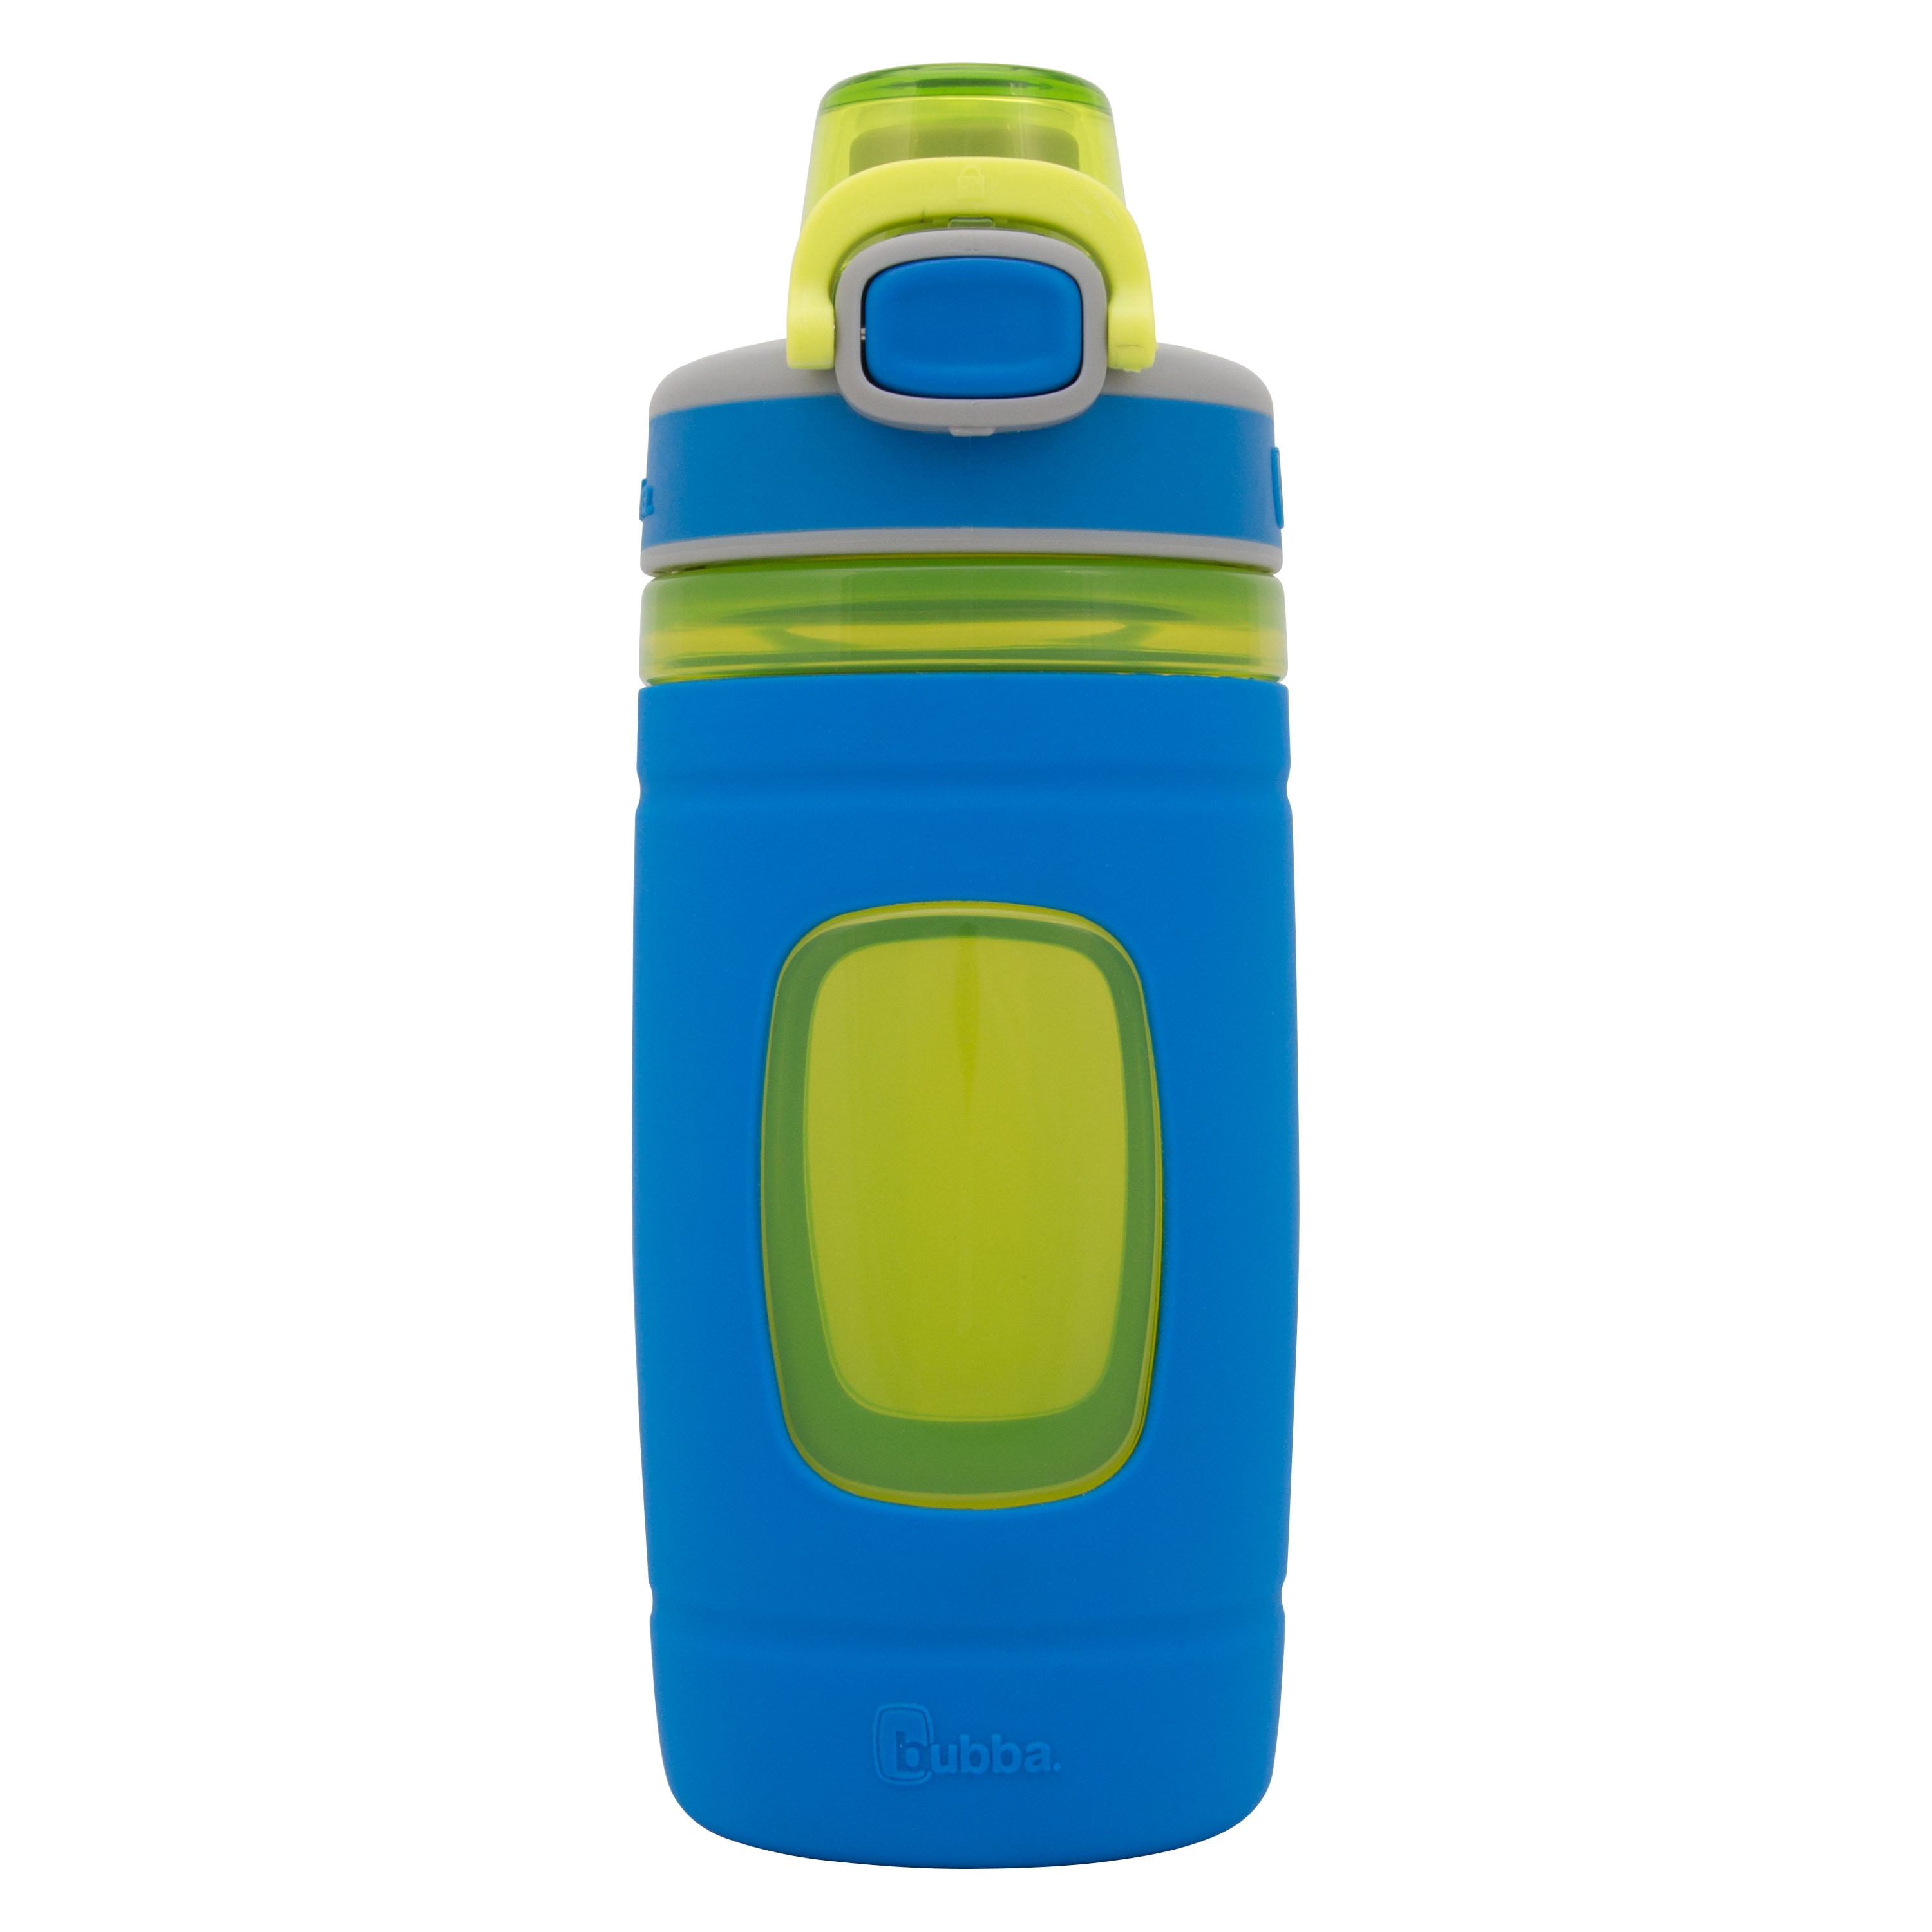 bubba Flo Kids Water Bottle Wide Mouth Lid with Silicone Sleeve in Blue, 16 fl oz.